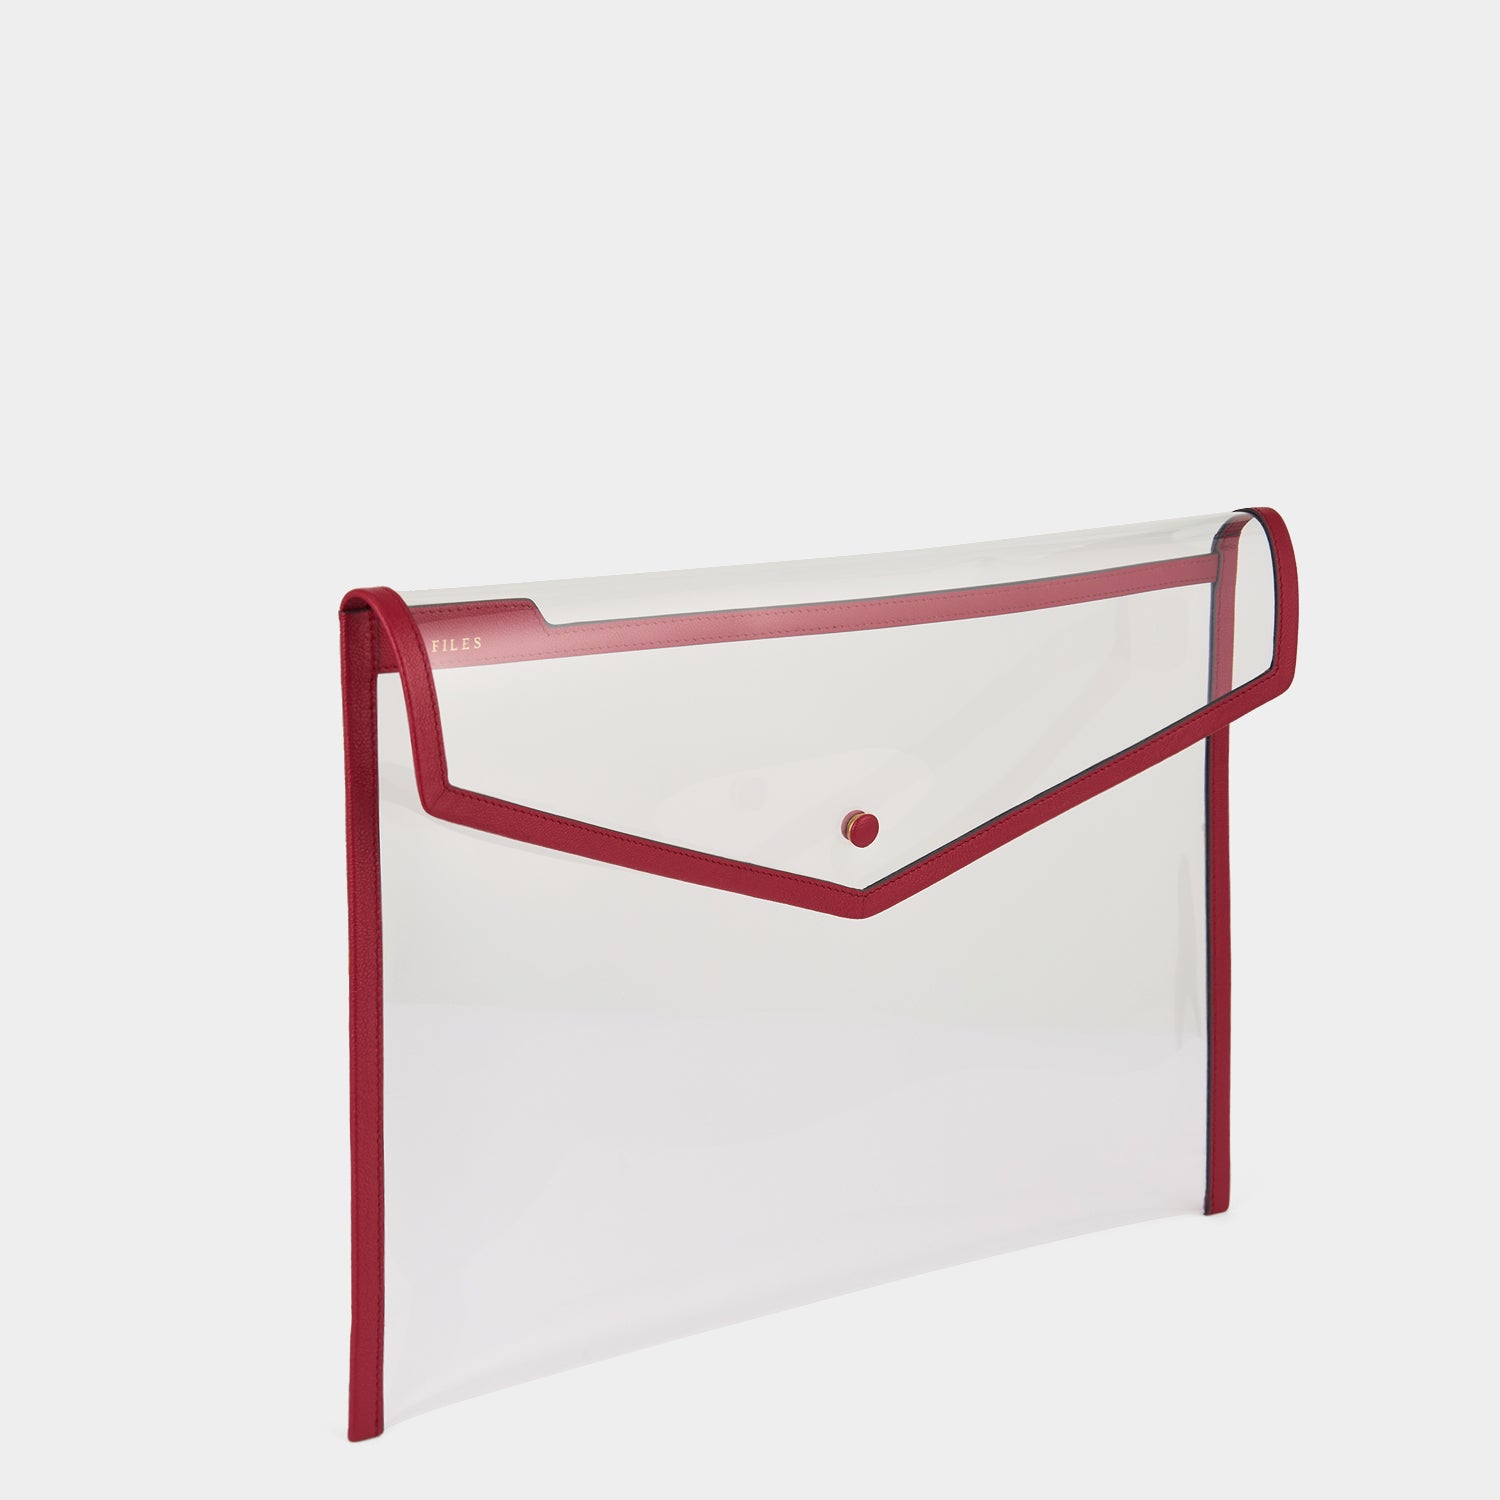 Files Envelope -

                  
                    Capra Leather in Red/Clear -
                  

                  Anya Hindmarch UK
